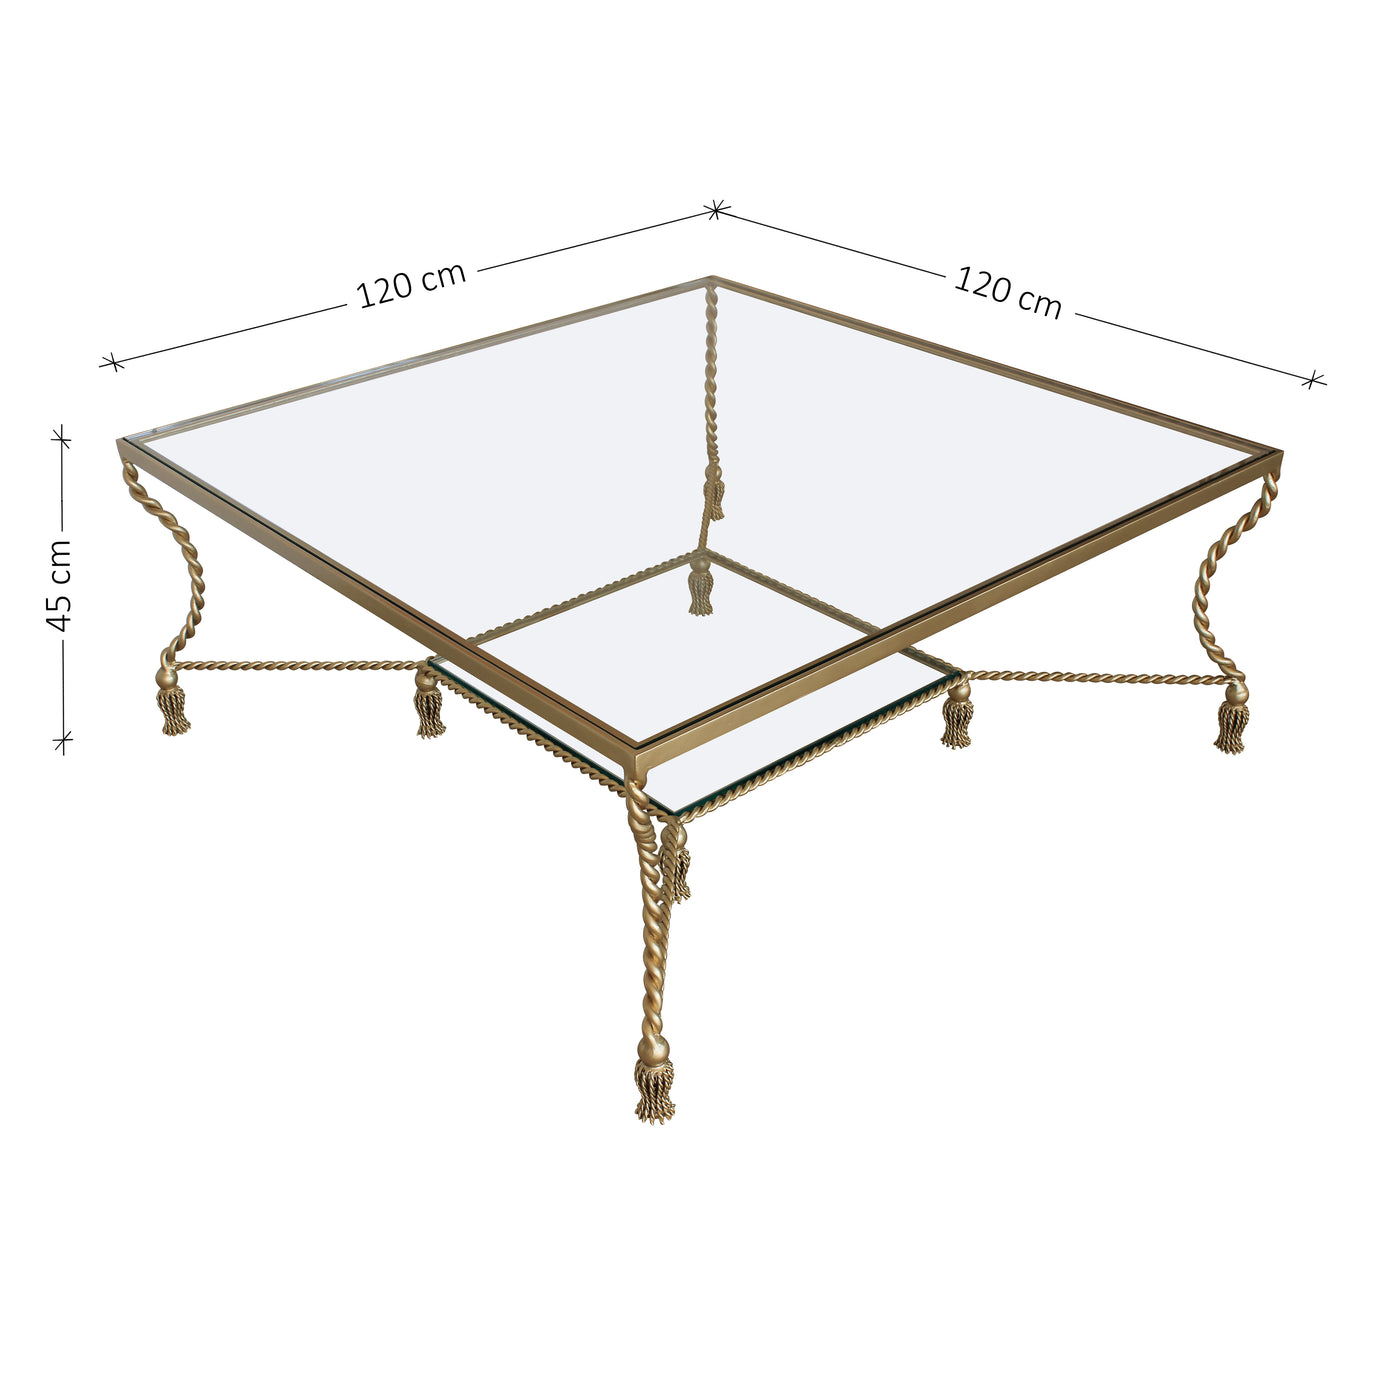 Golden metal majlis table inspired from twisted rope and curtain tassels topped with glass